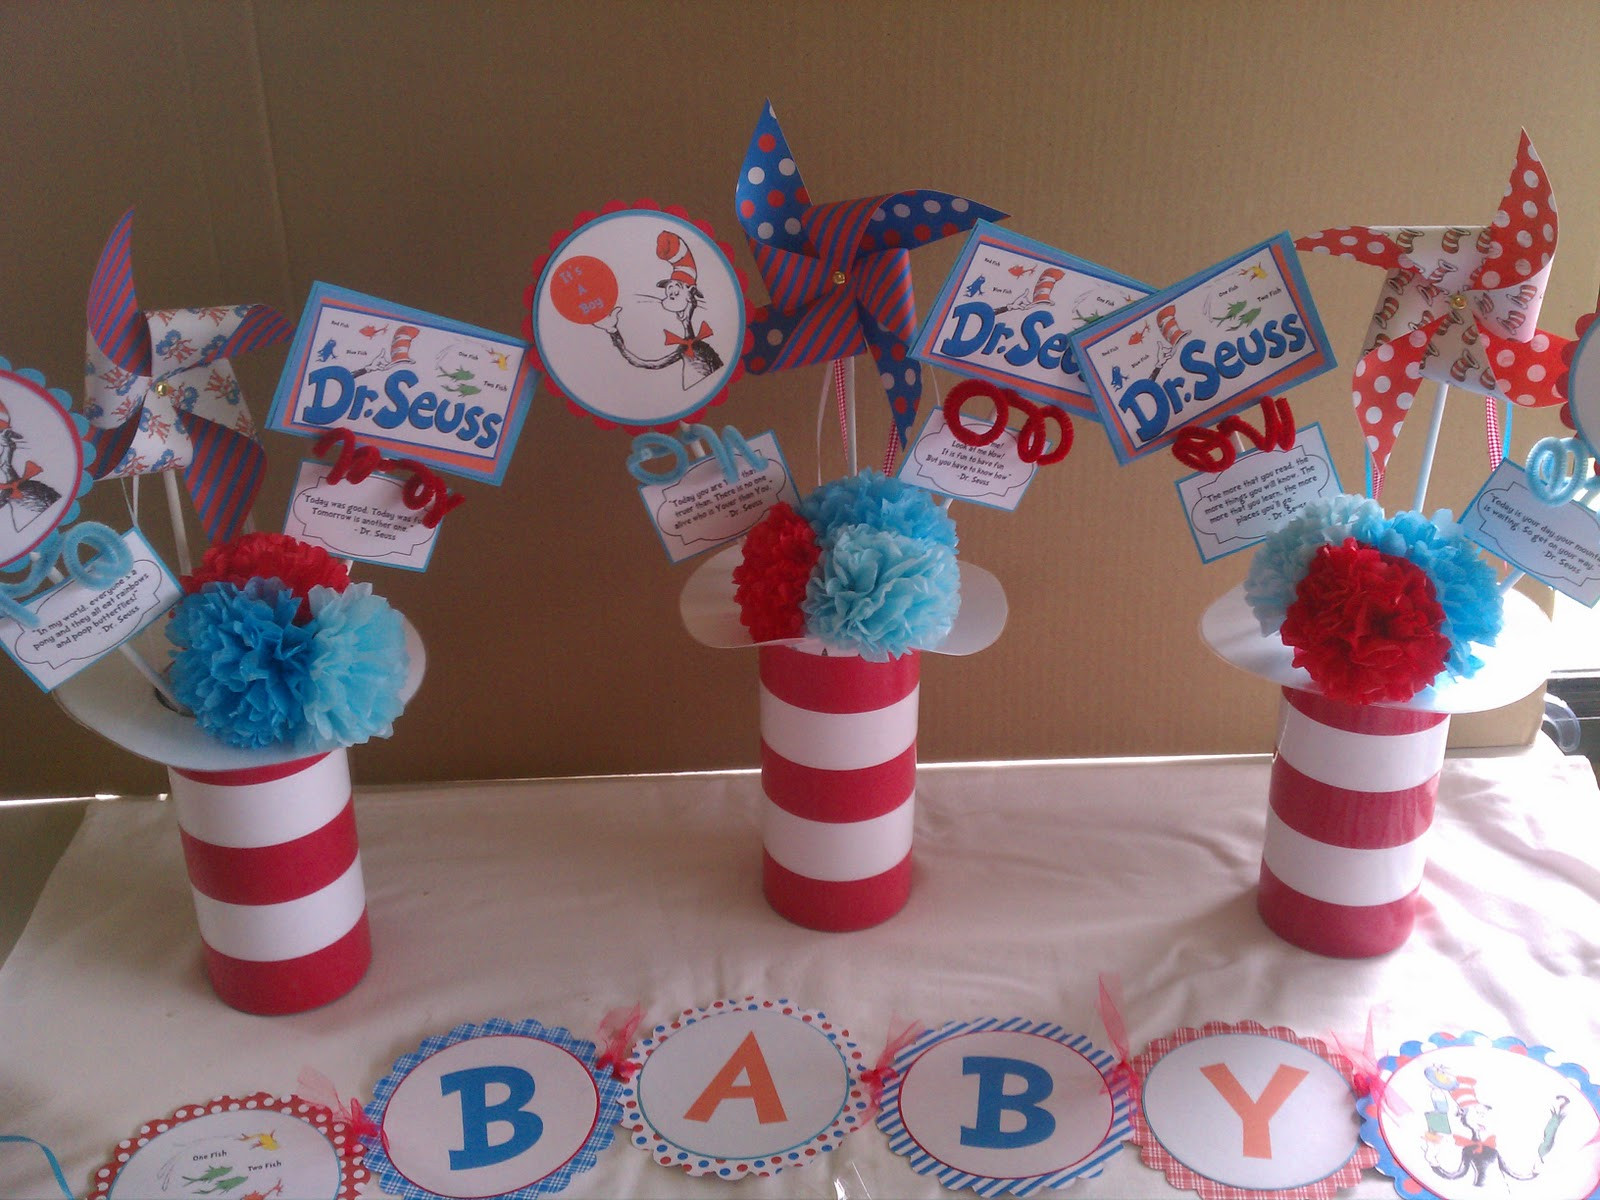 Dr.Seuss Baby Shower Gifts
 Kc s Creations Dr Seuss Baby Shower